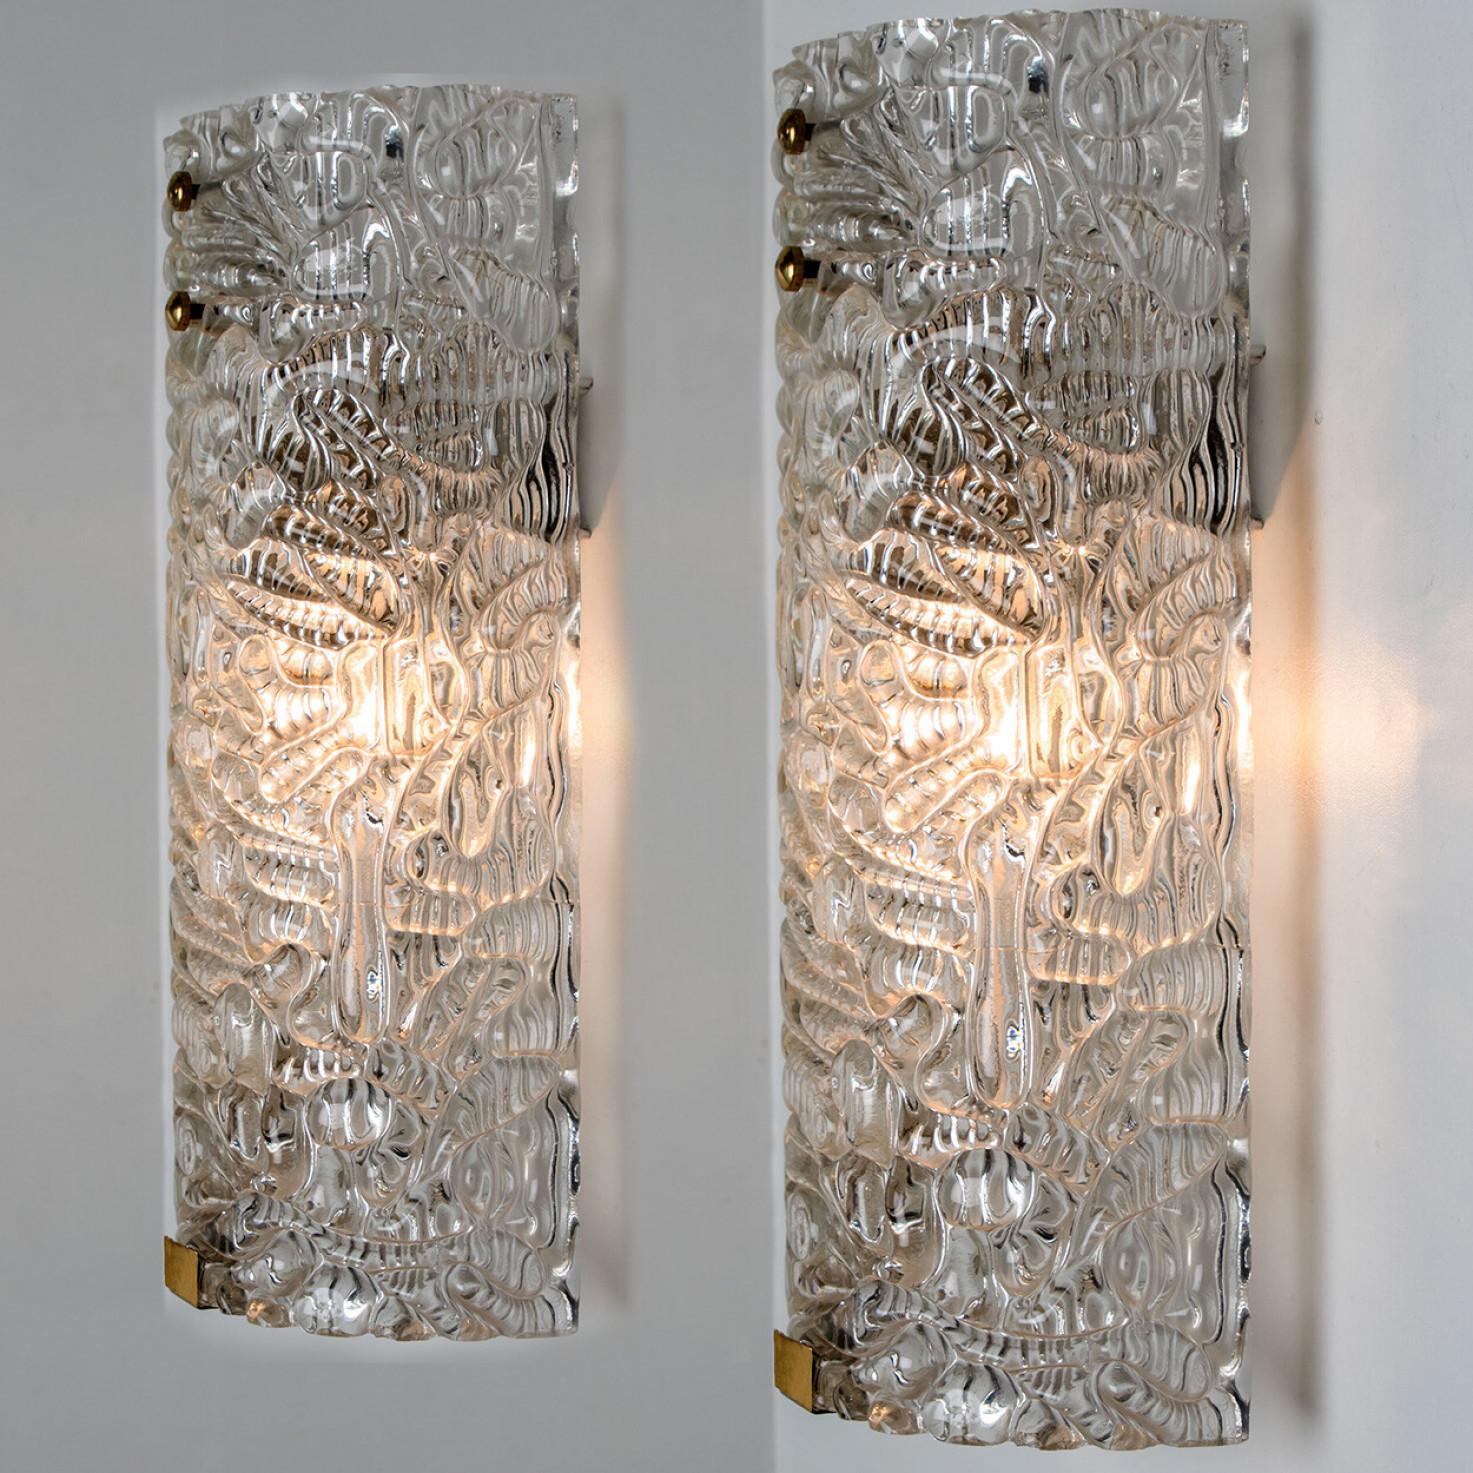 A pair of Clear Bubbled Glass Wall Light Fixtures by Hillebrand, Germany, 1960s For Sale 2